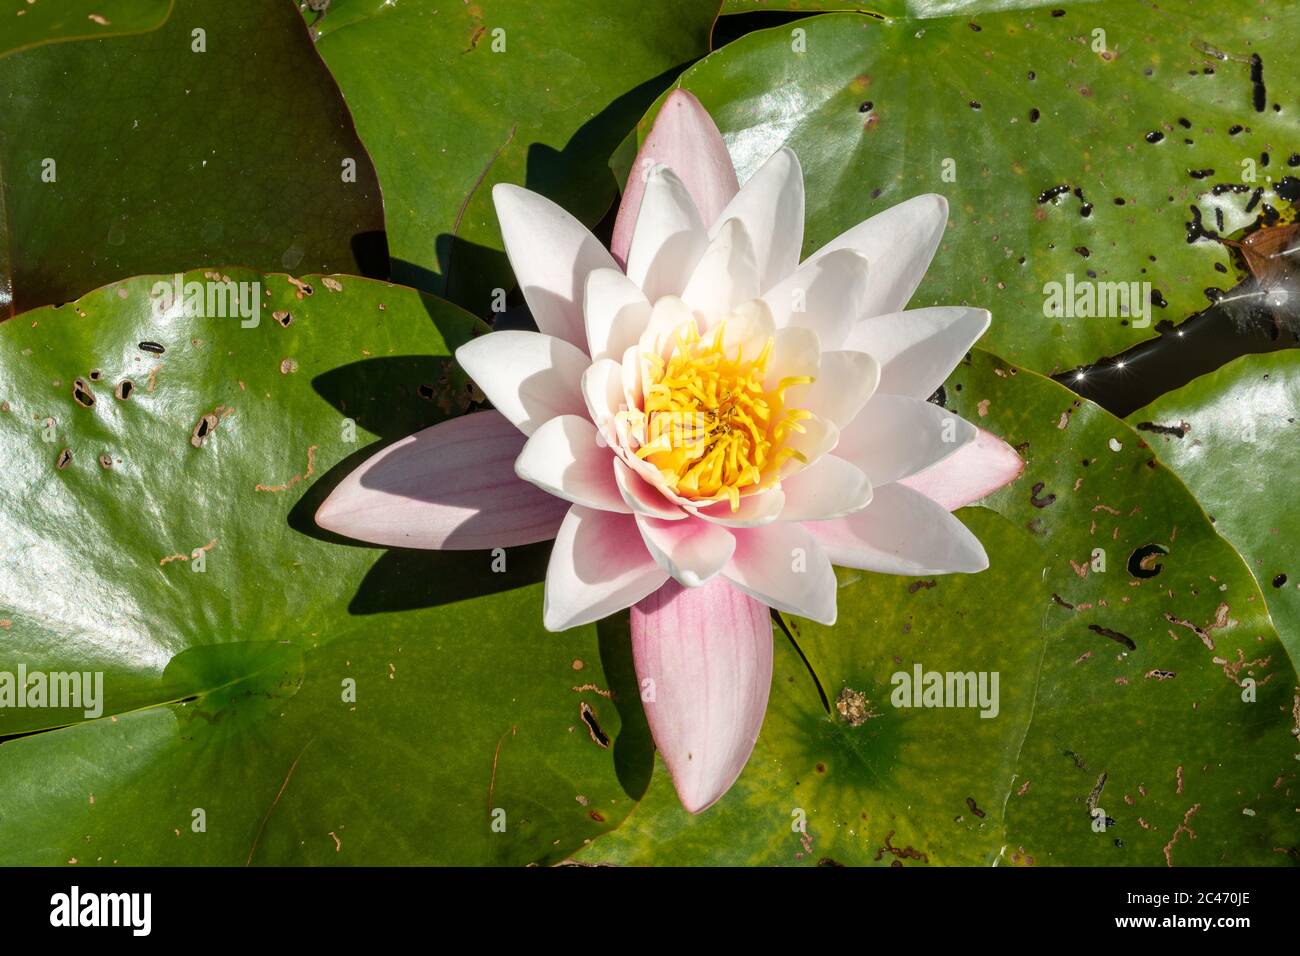 Water lily Nymphaeaceae in bloom, close-up of a water lily flower in June, UK Stock Photo